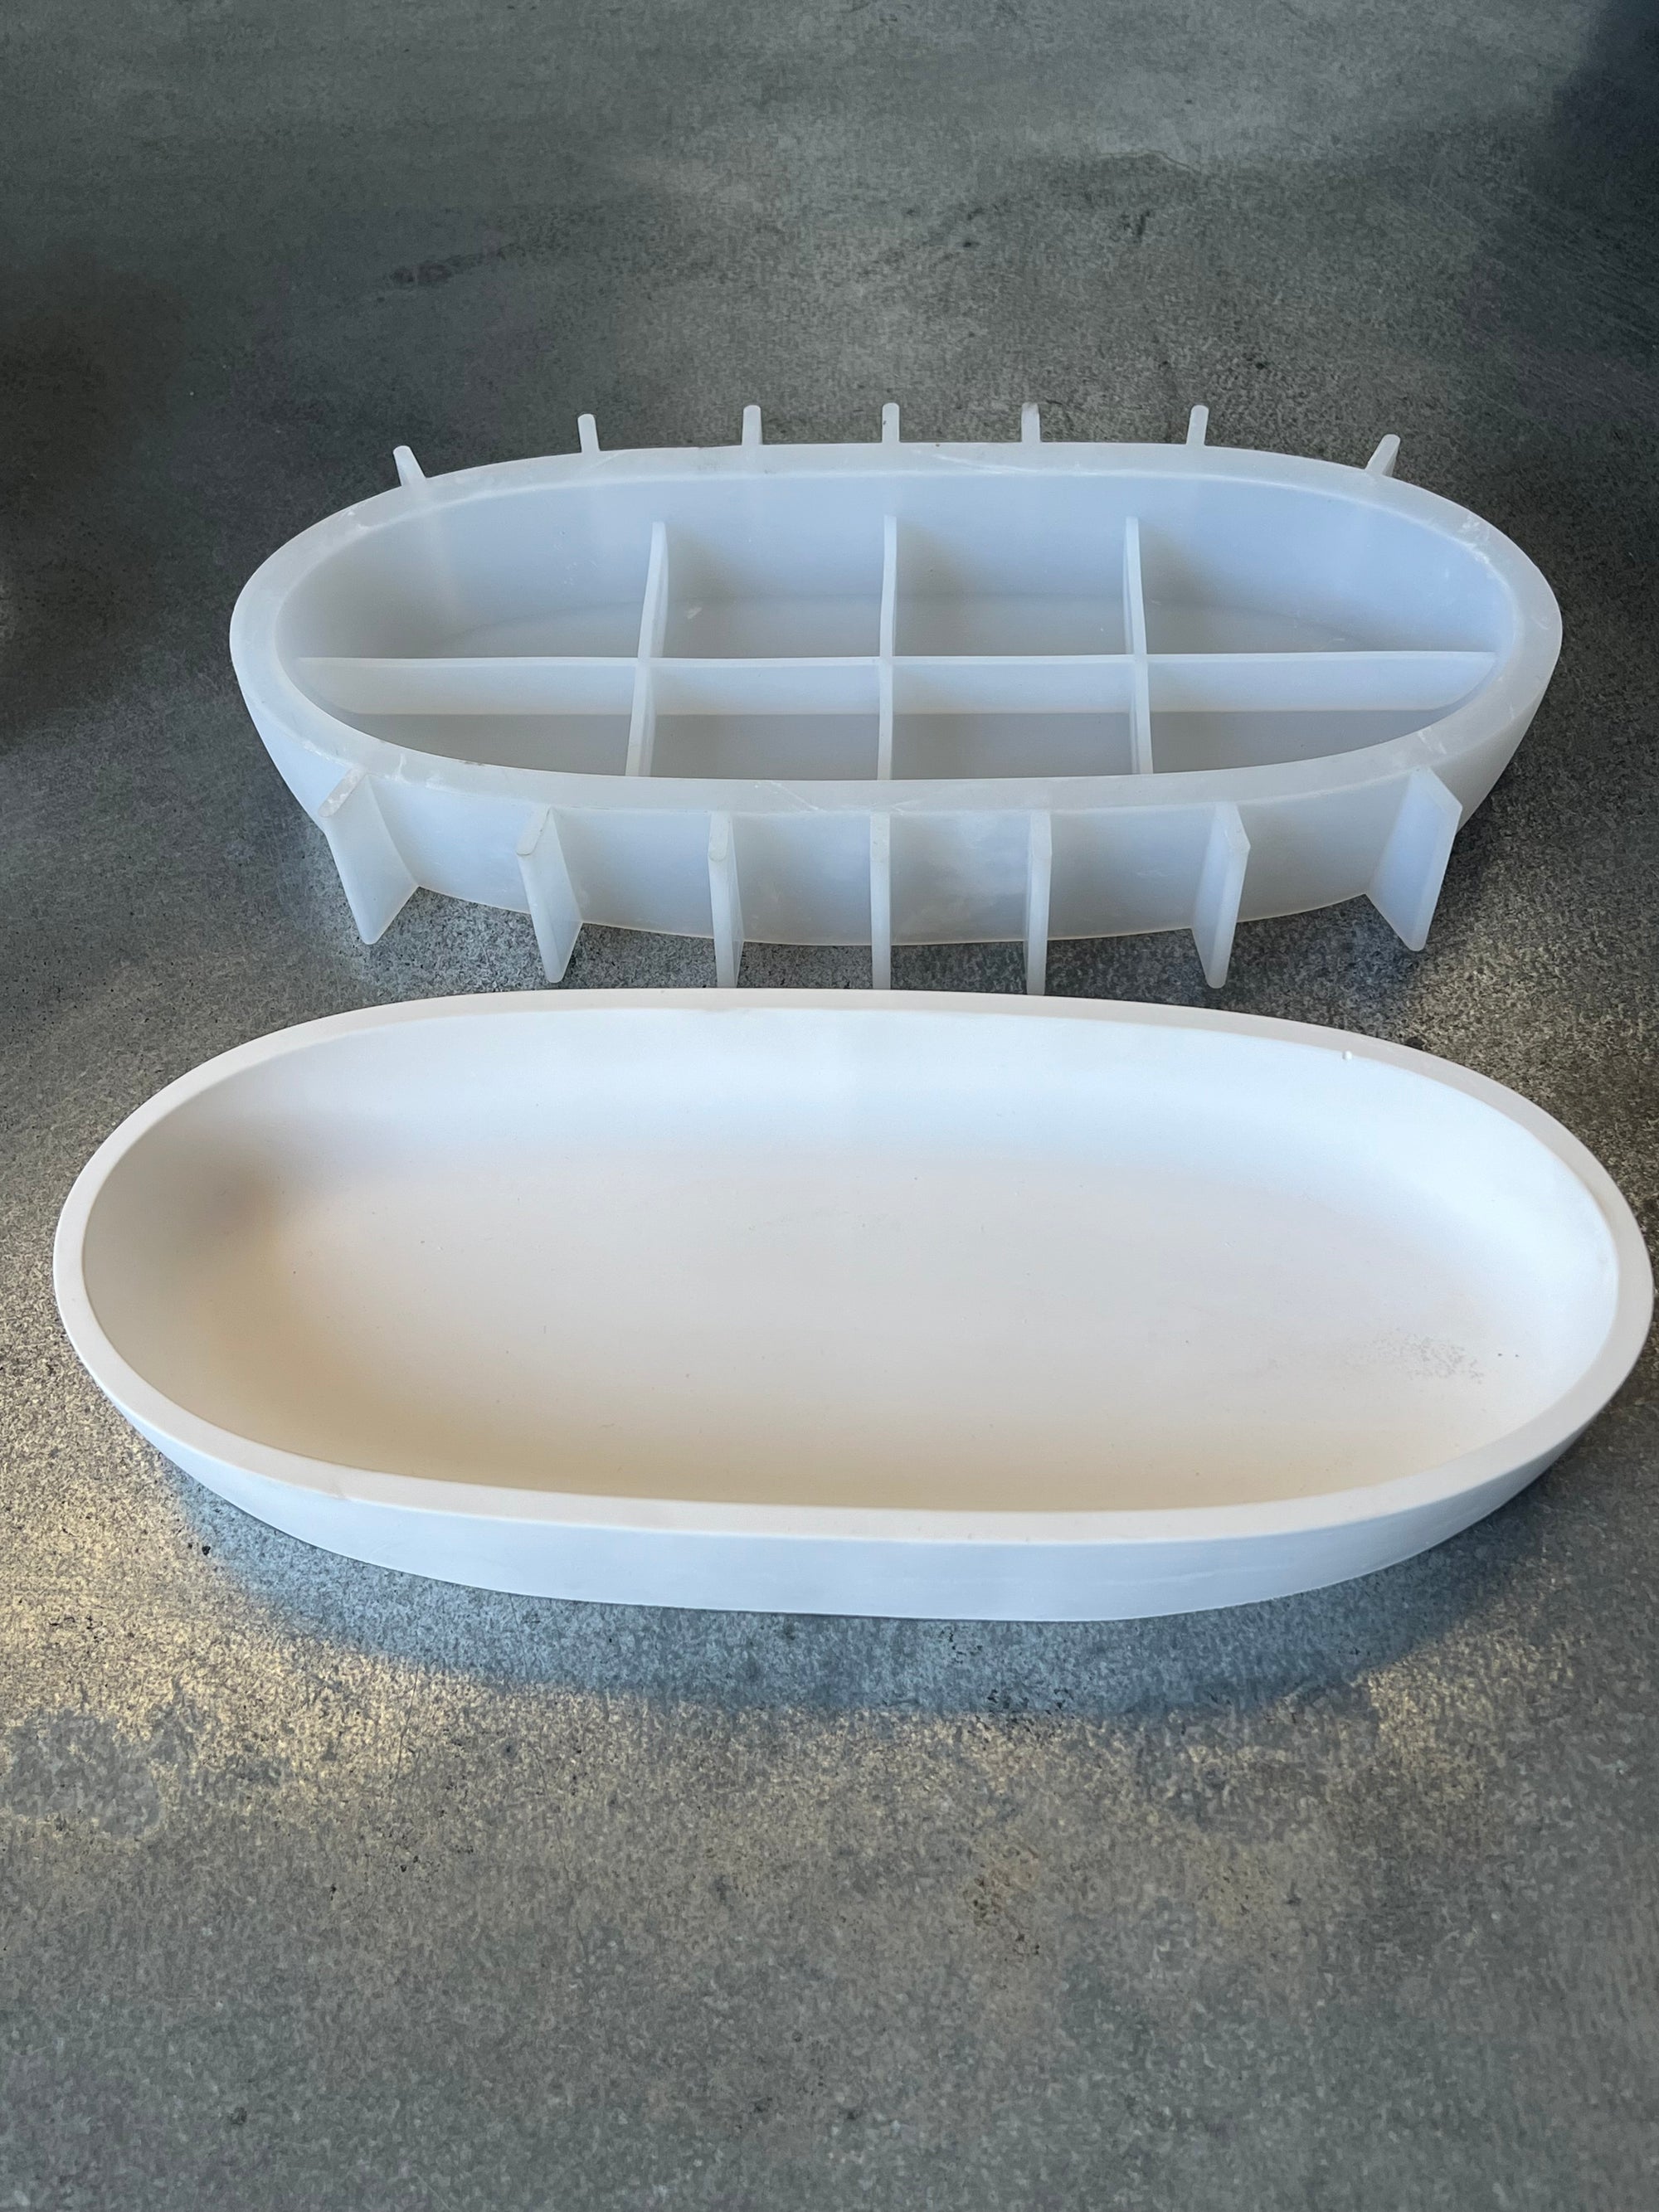 Large Oval Tray Mold